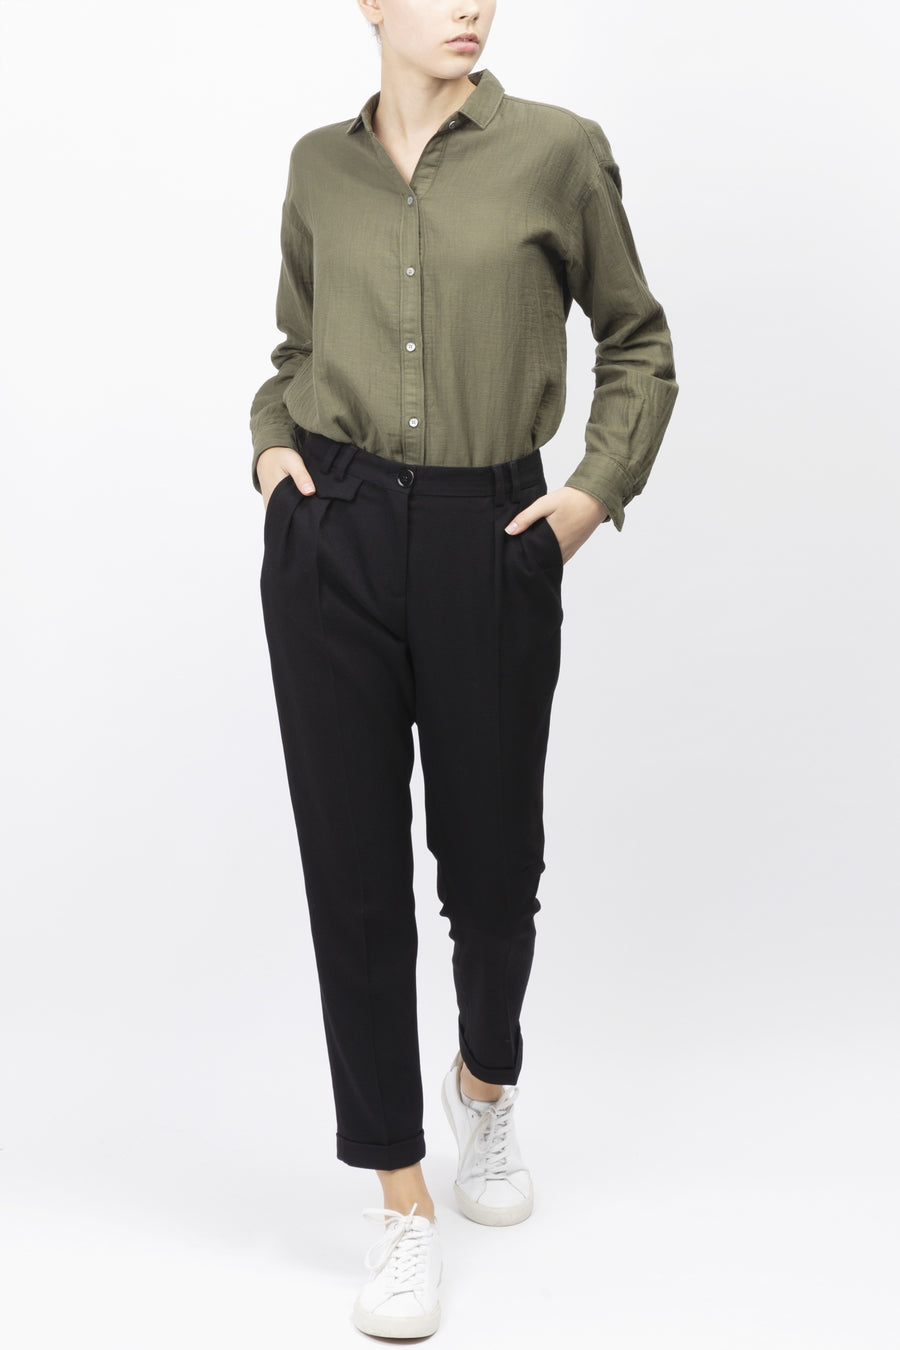 Harford shirts, dresses and pants for women